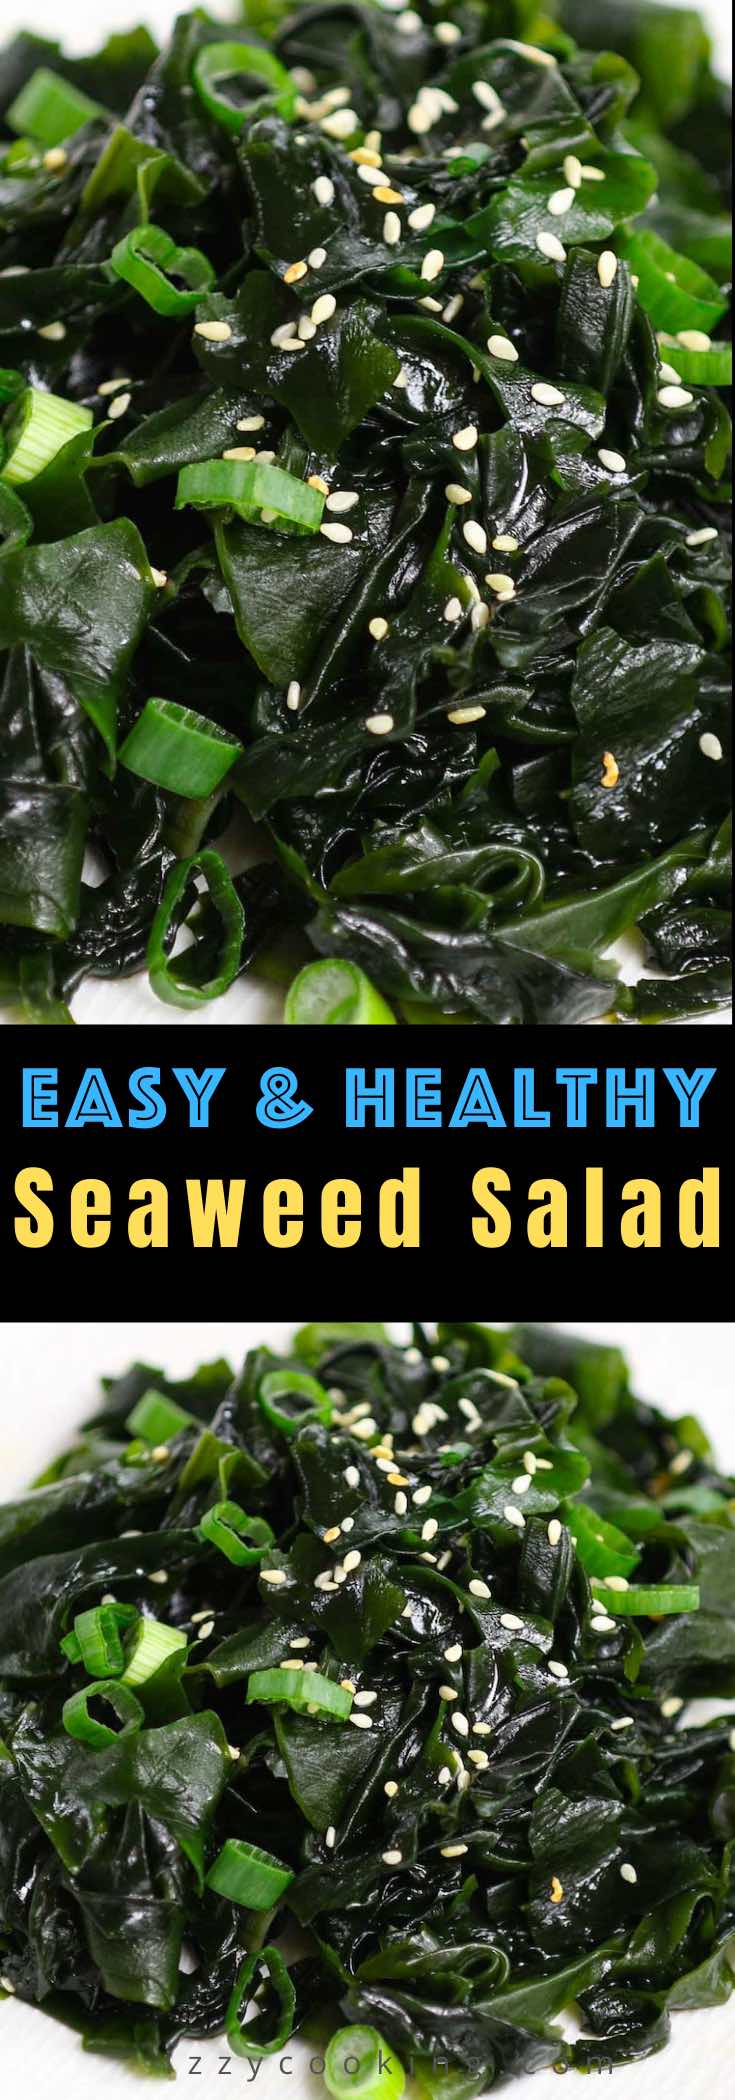 This healthy Seaweed Salad is refreshing, delicious, and super easy to prepare. Made of dried wakame, sesame seeds, and a simple dressing, this Japanese salad recipe is made from scratch and loaded with great nutrients. Serve with cherry tomatoes and green leafy vegetables for a low-carb lunch or dinner!